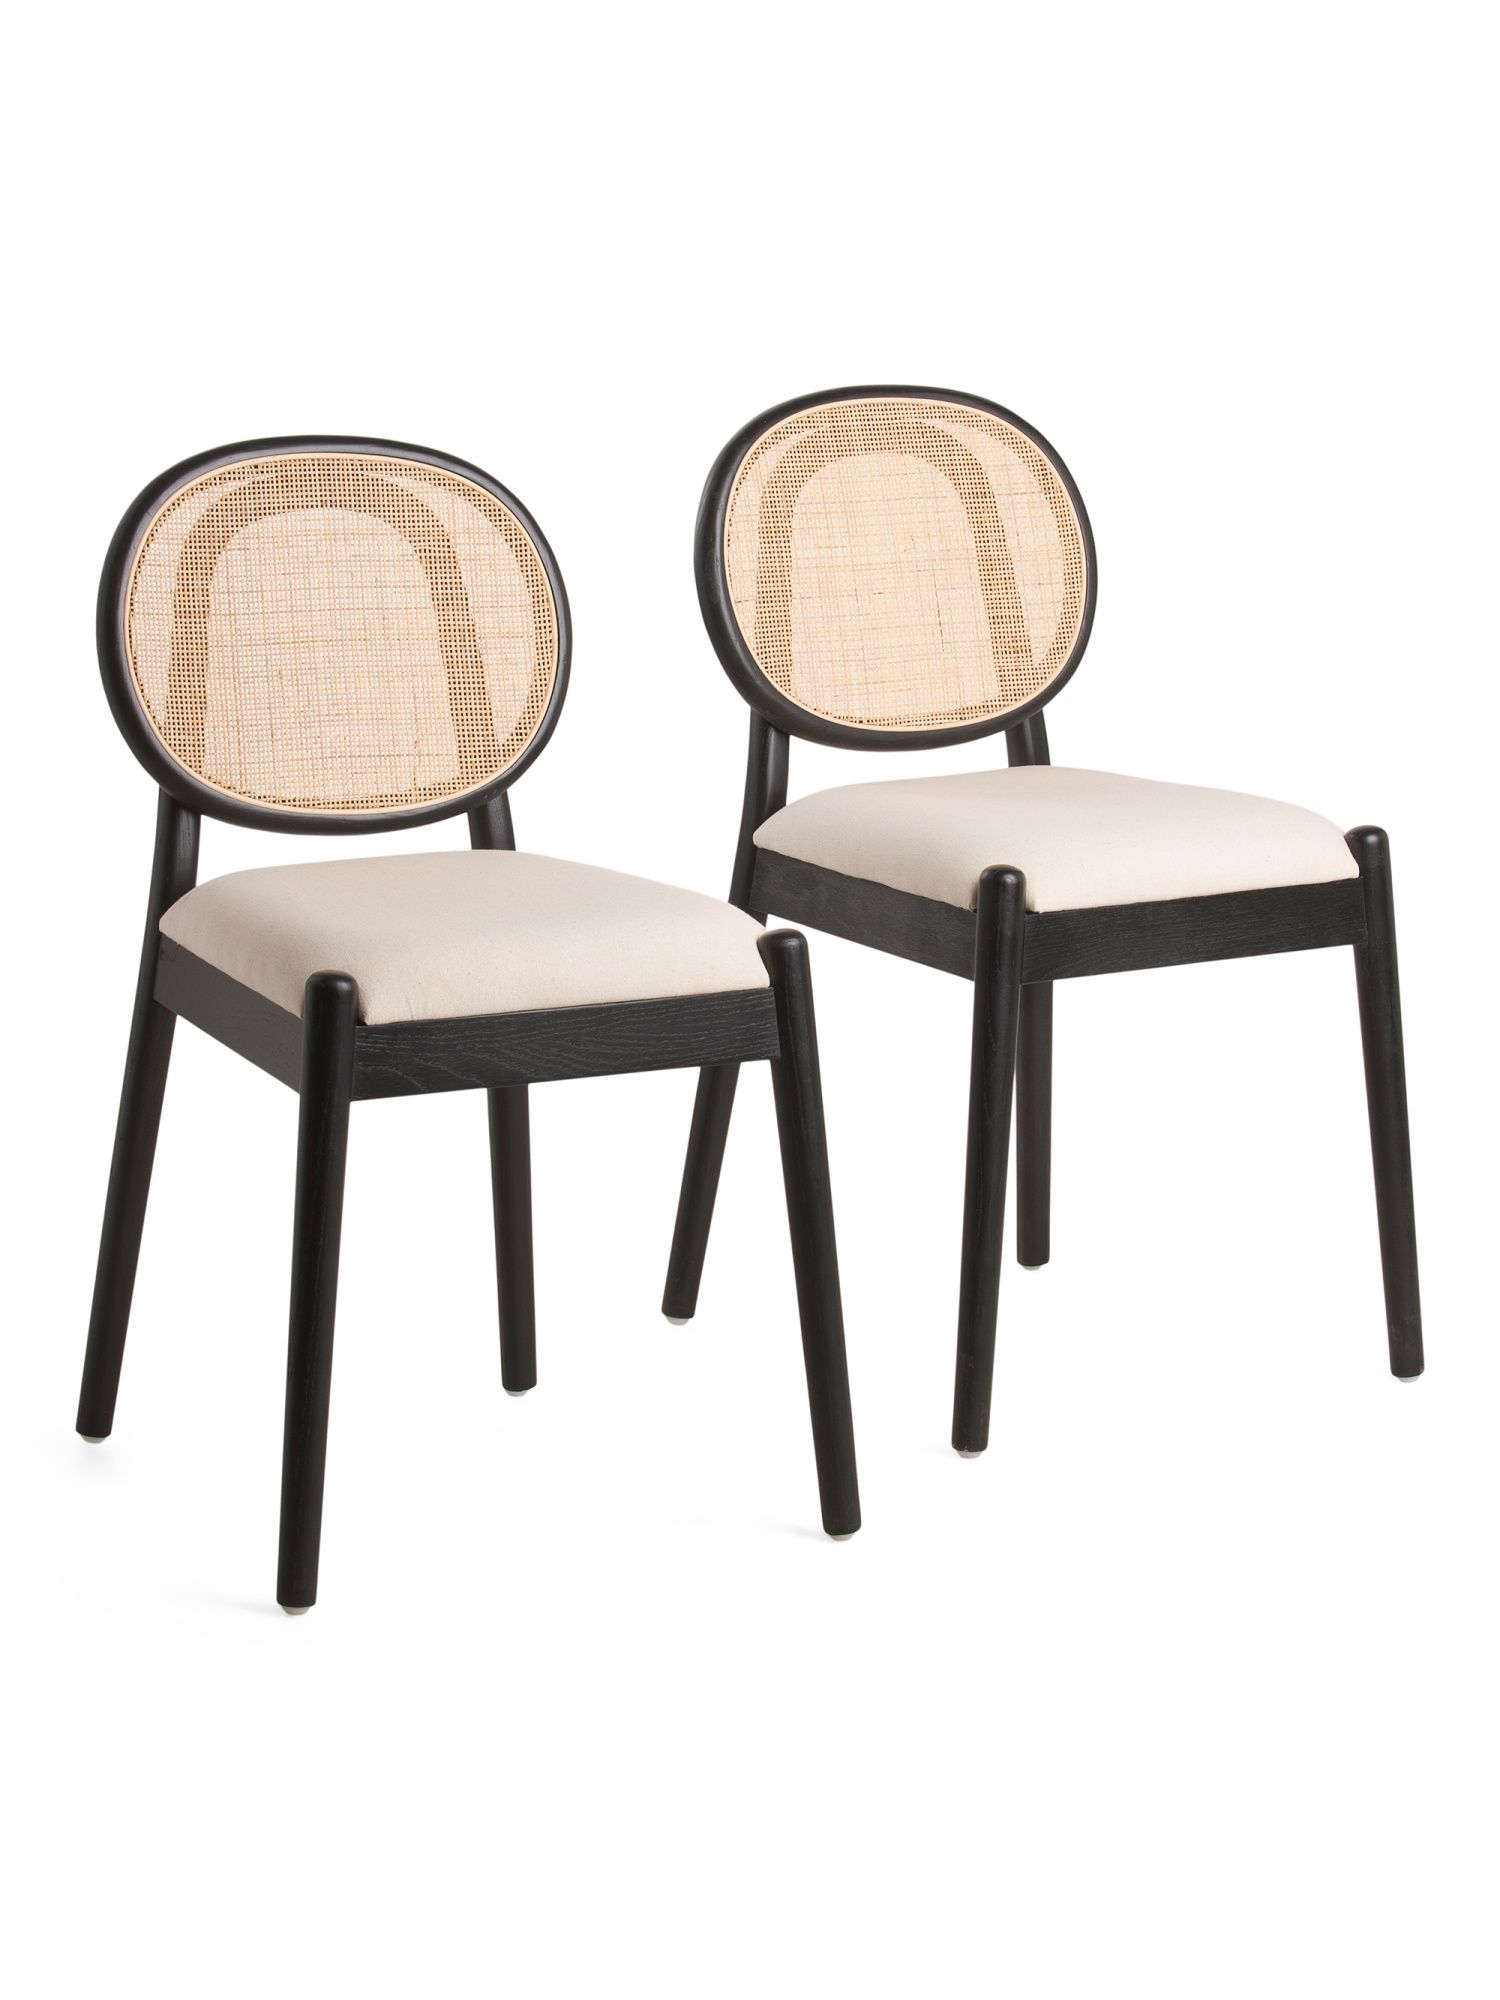 Set Of 2 Amelie Rattan Dining Chairs With Cushions | Chairs & Seating | Marshalls | Marshalls